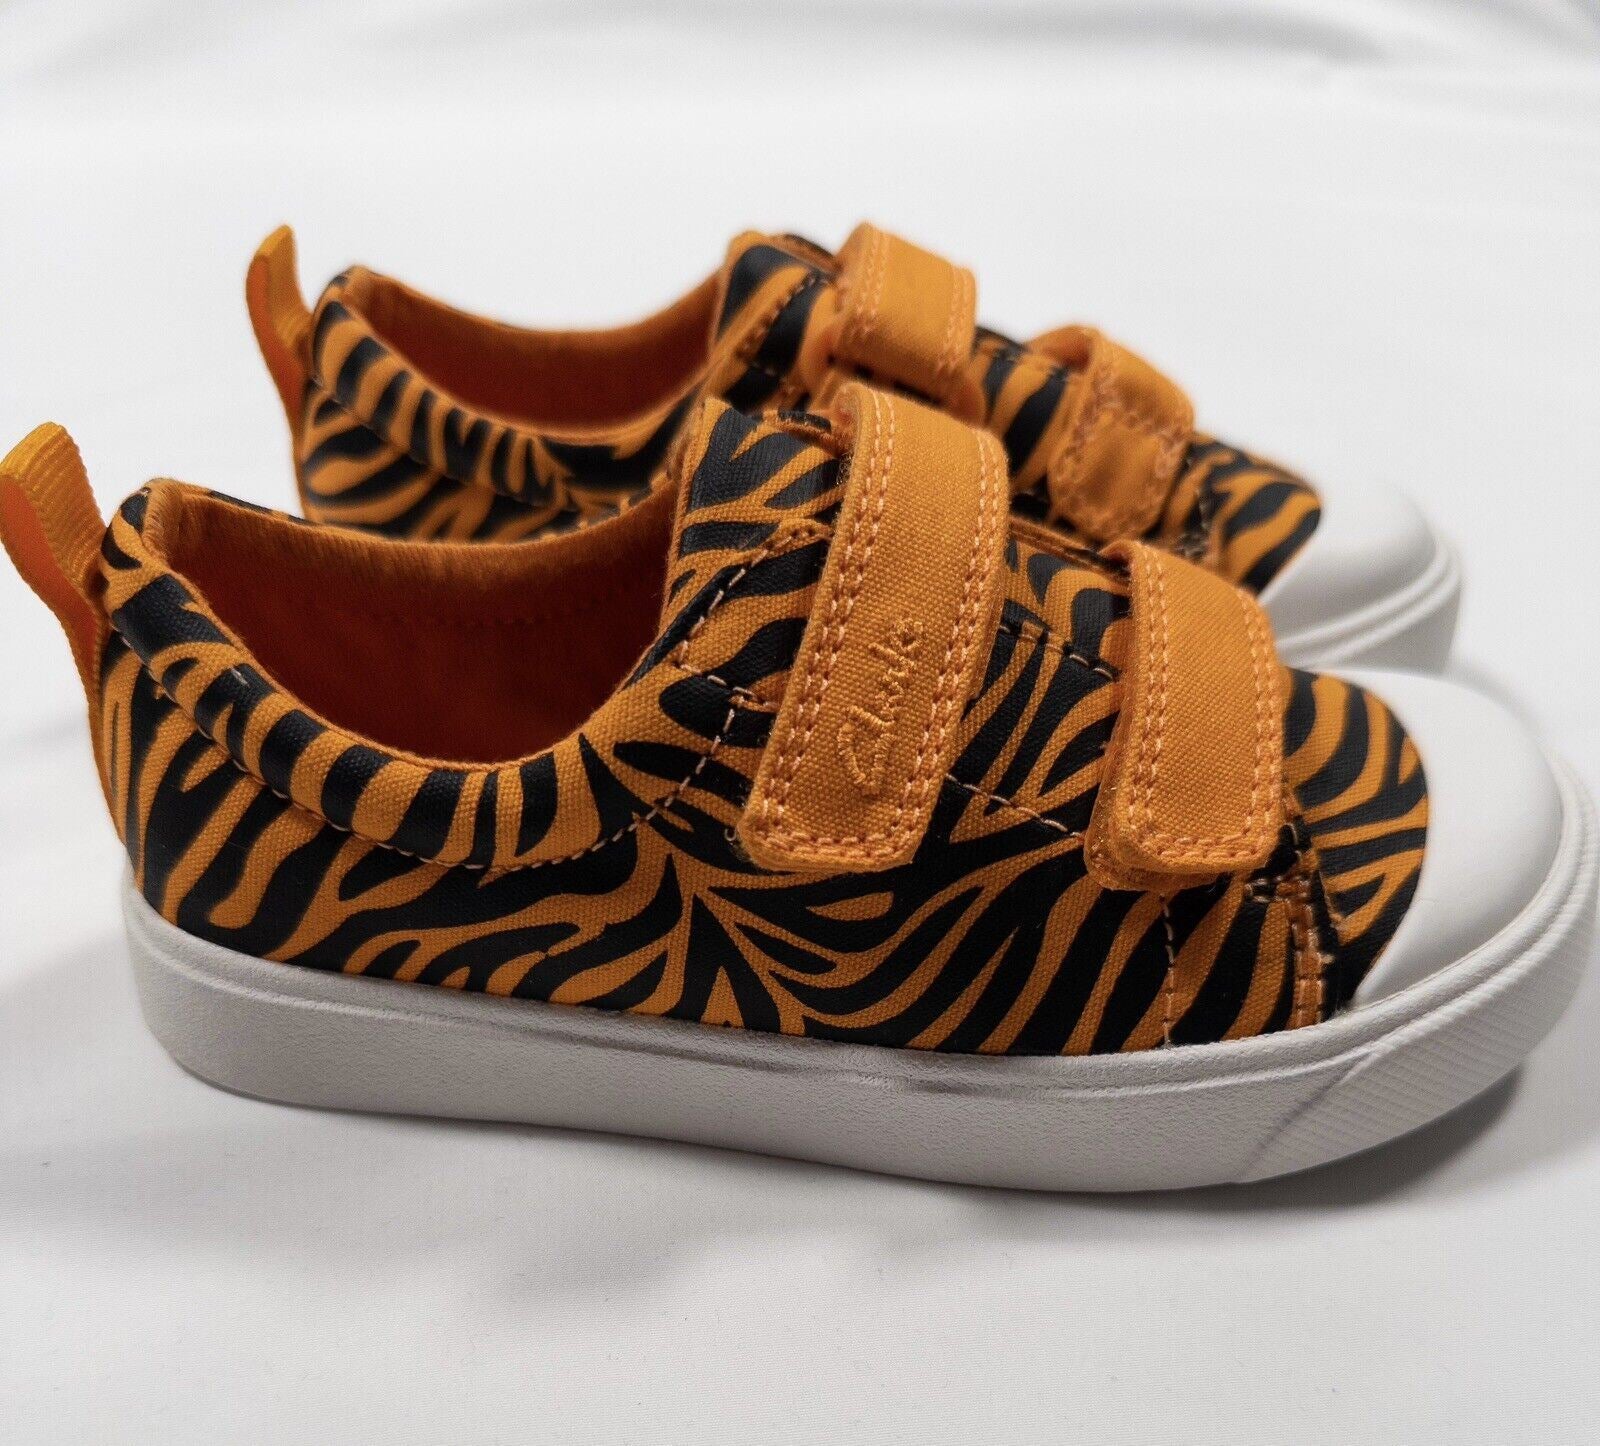 Unisex kids Boys / Girls Clarks trainers Shoes size UK 8.5 G Tiger Print